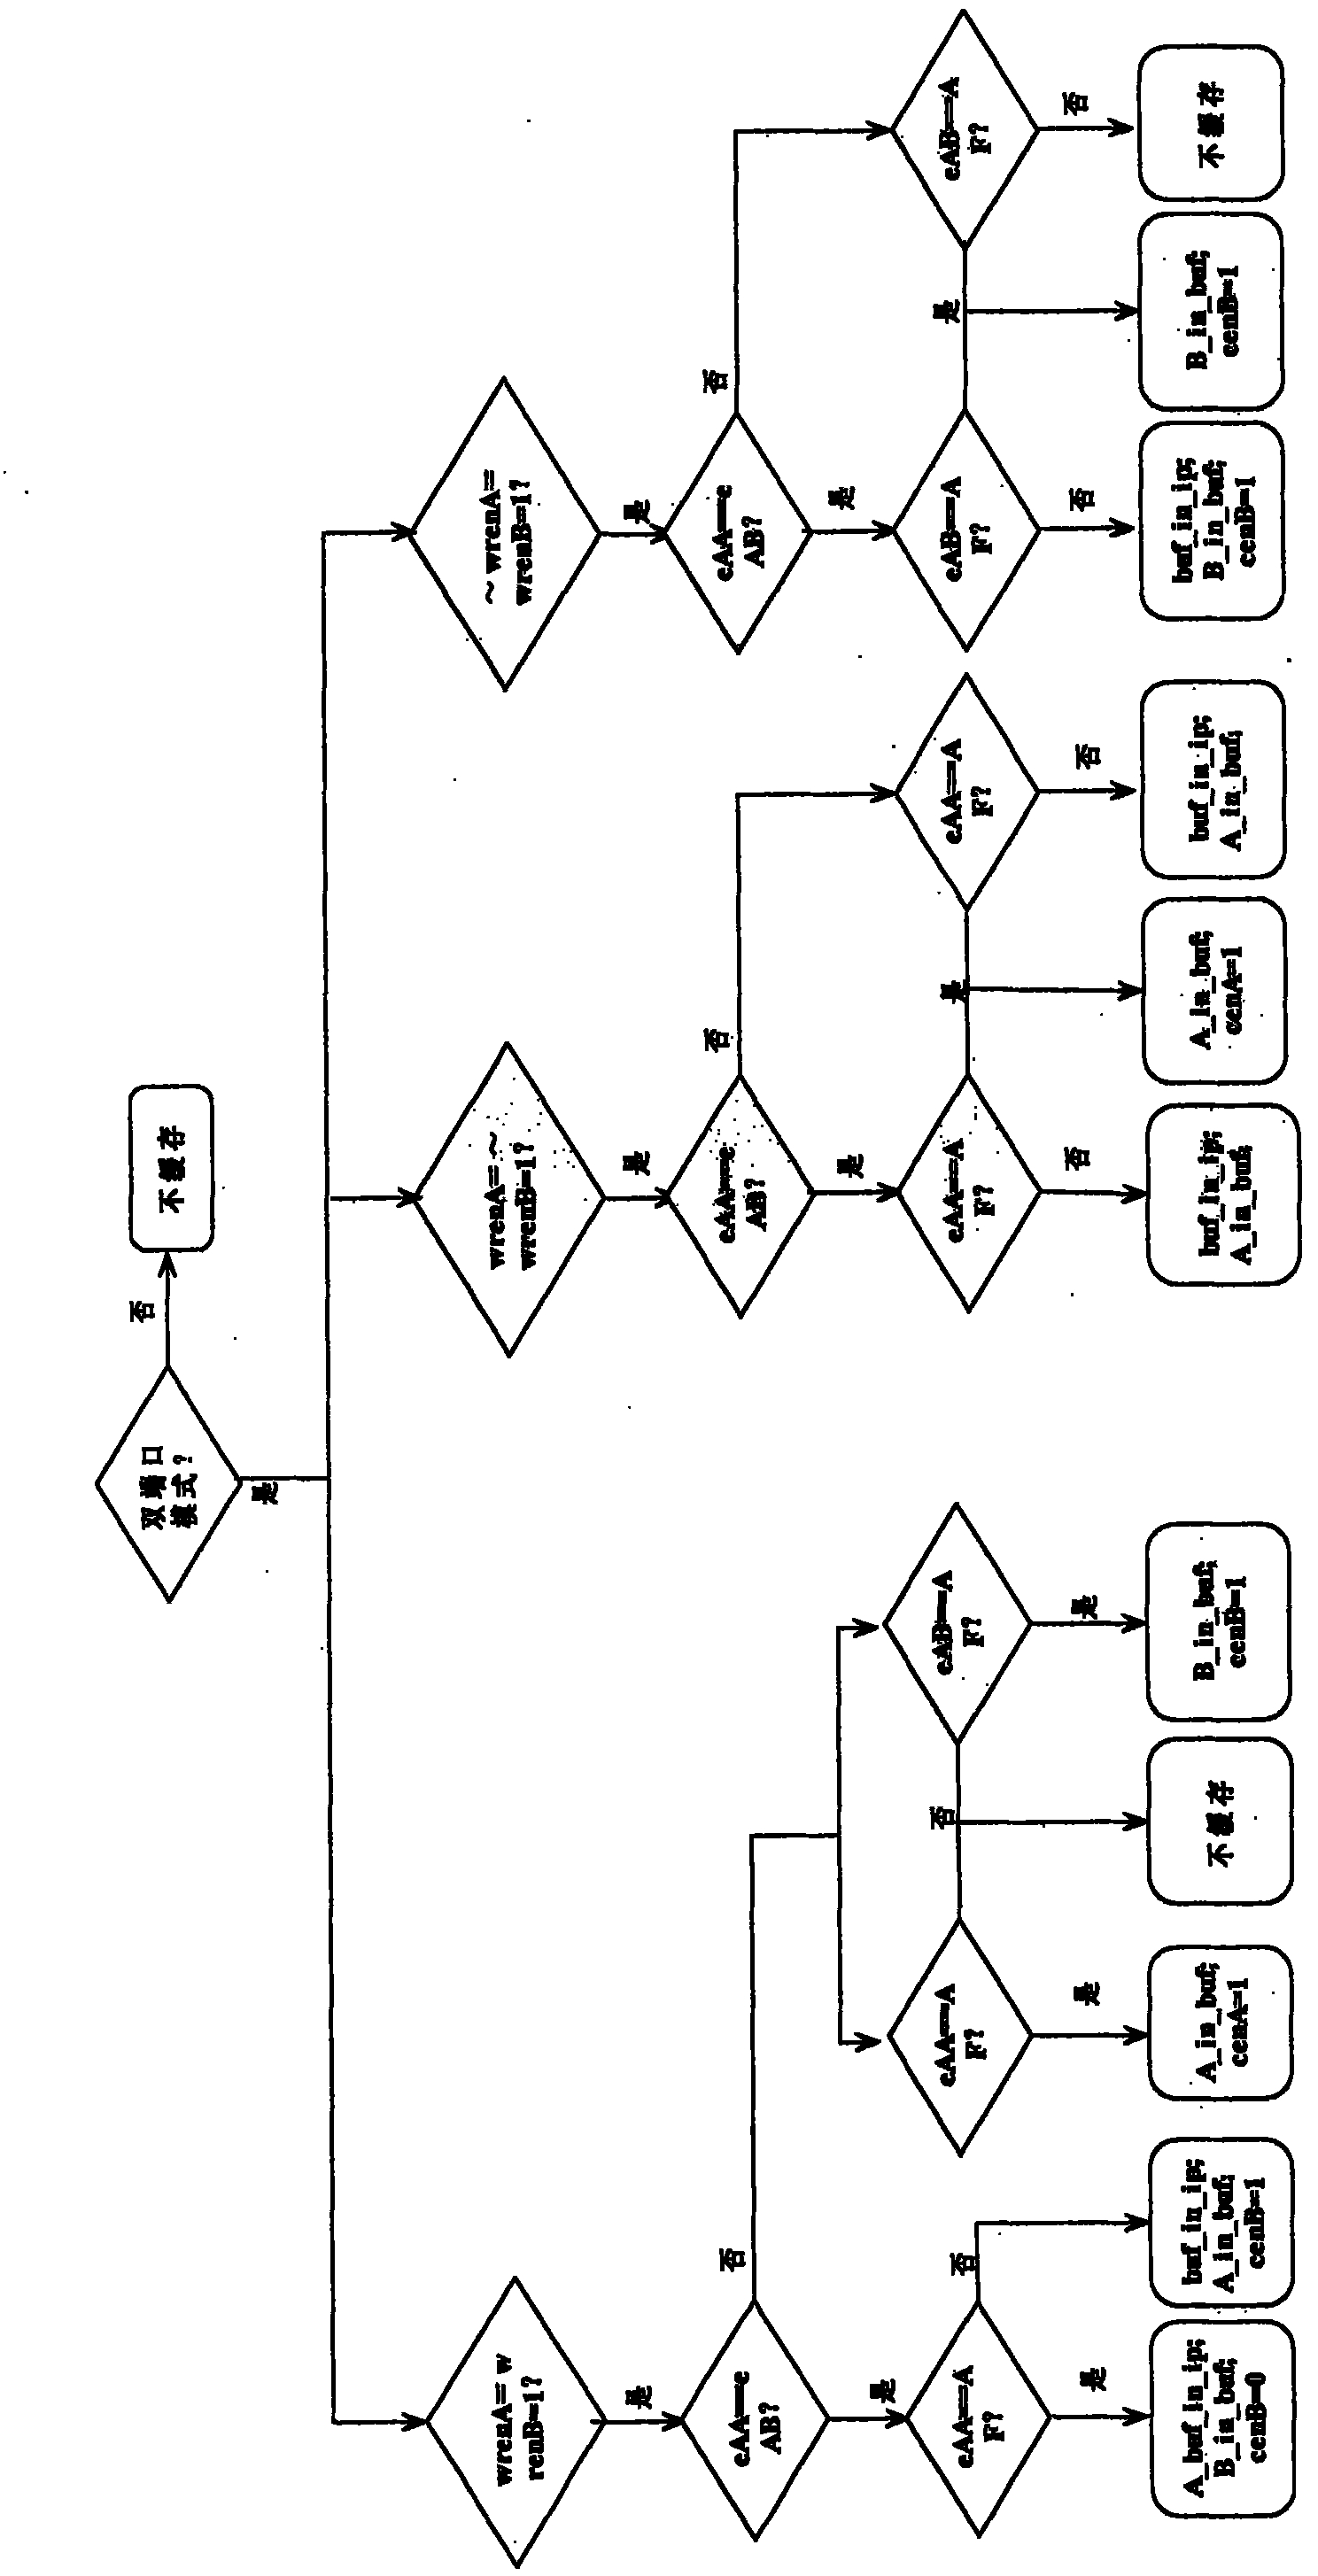 Embedded programmable memory based on memory IP core